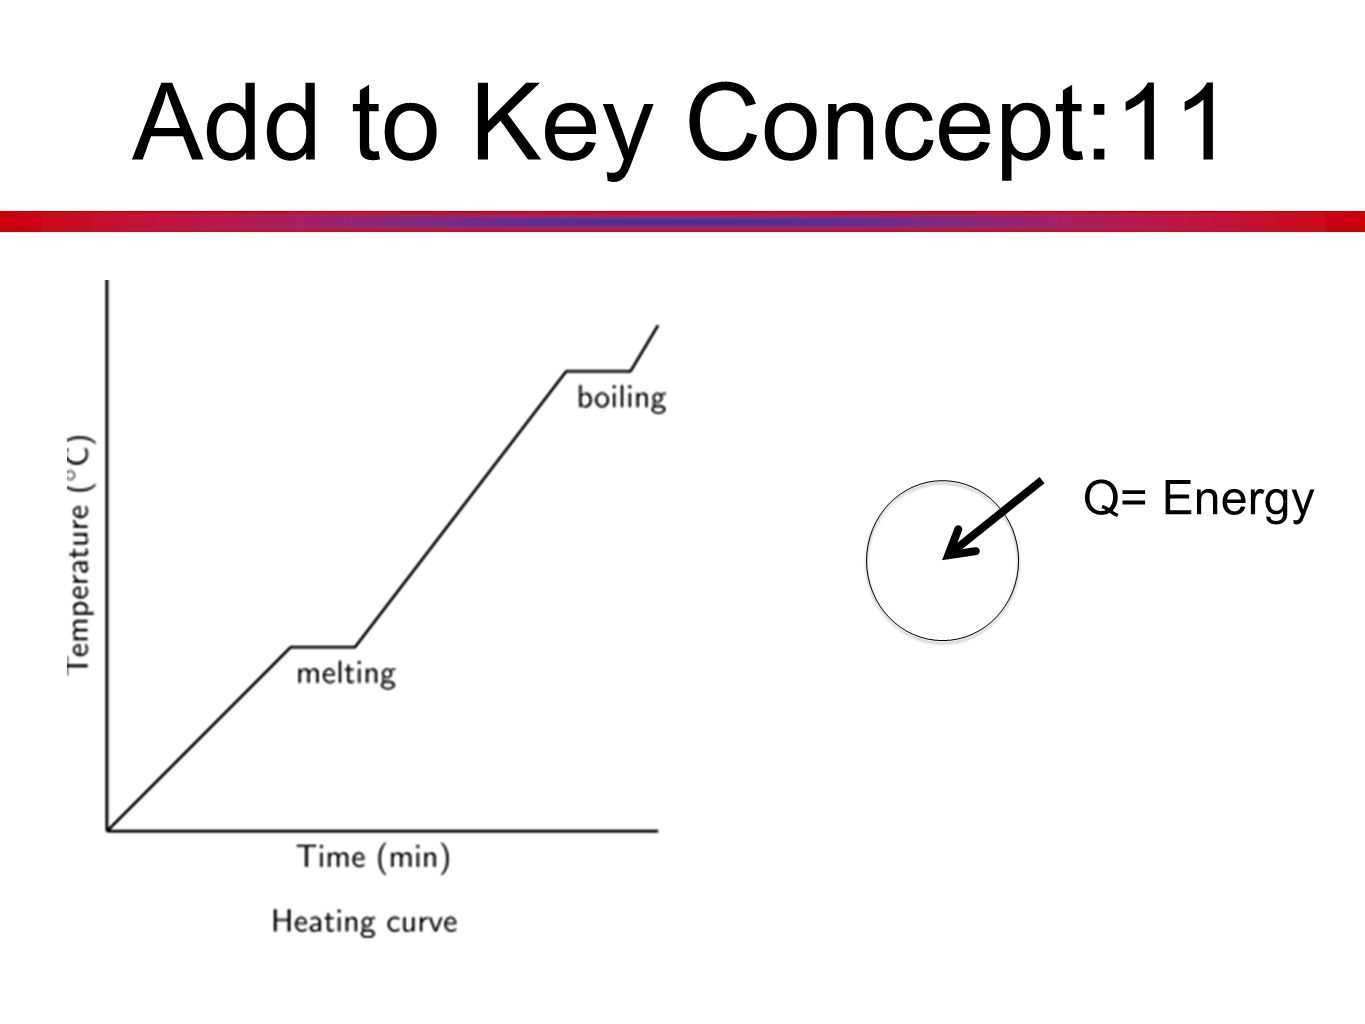 Add to Key Concept:11 Q= Energy